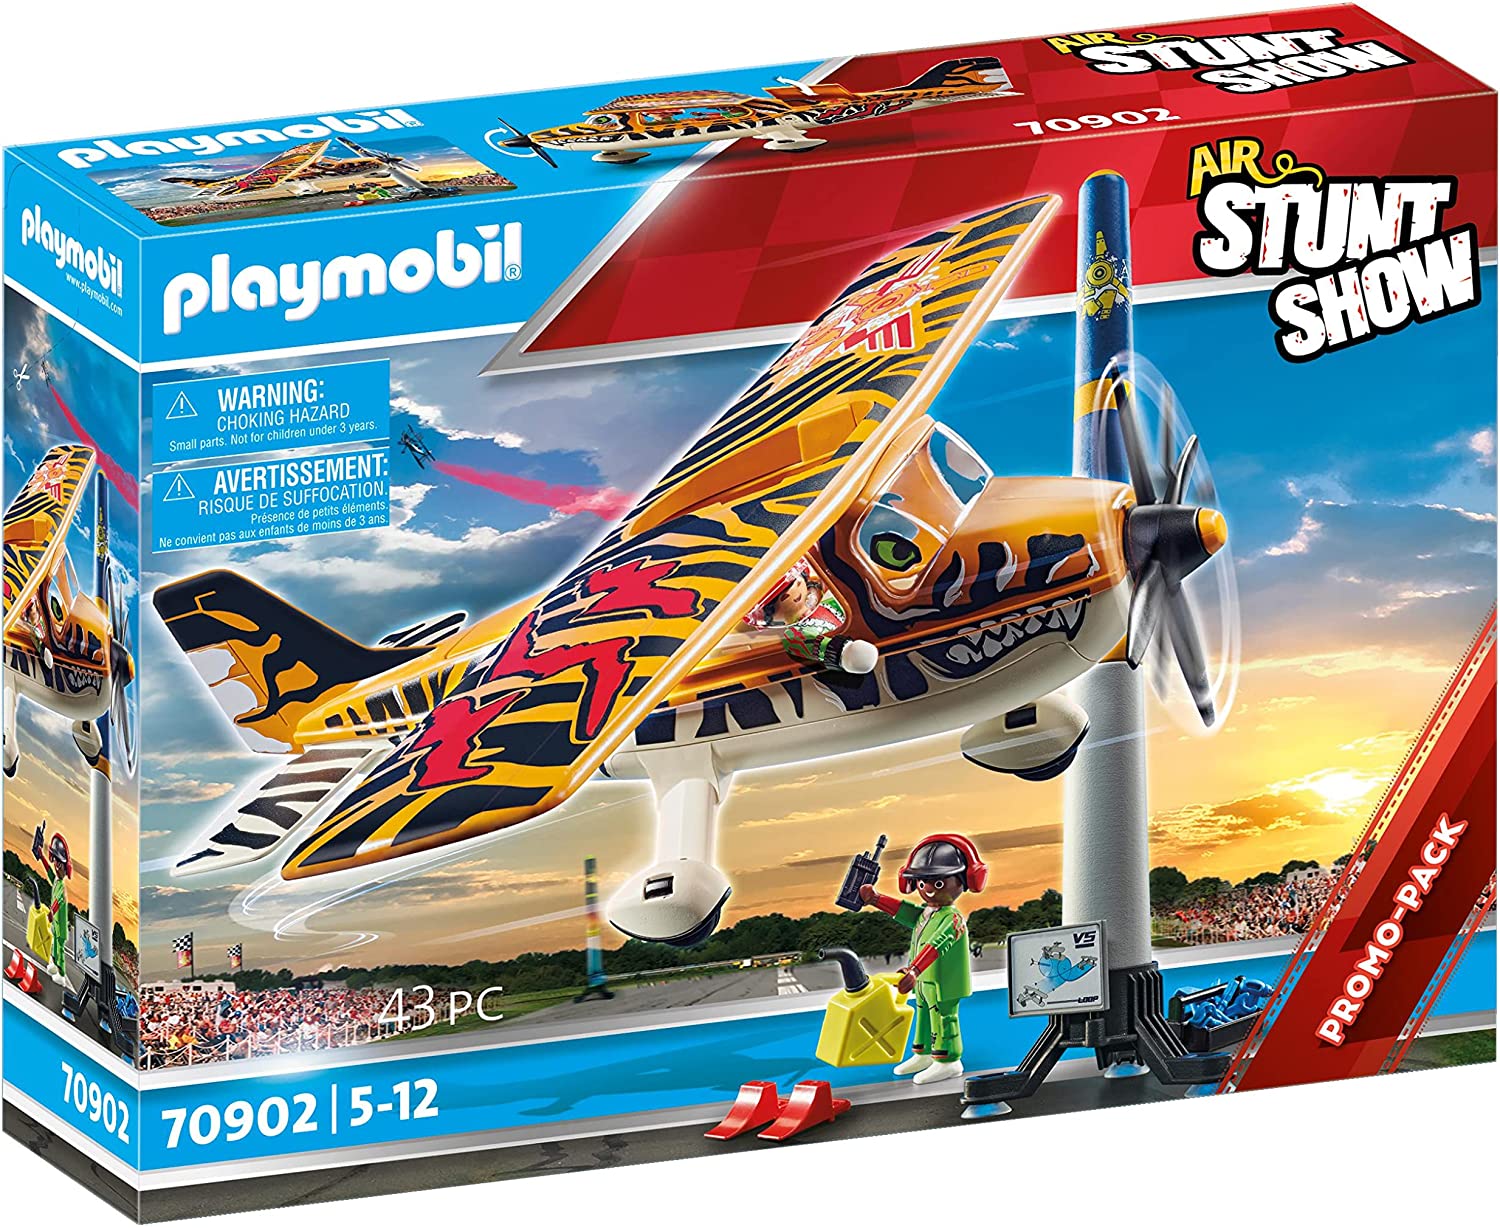 PLAYMOBIL Air Stuntshow 70902 Tiger Propeller Aeroplane Toy for Children Aged 5 Years and Up